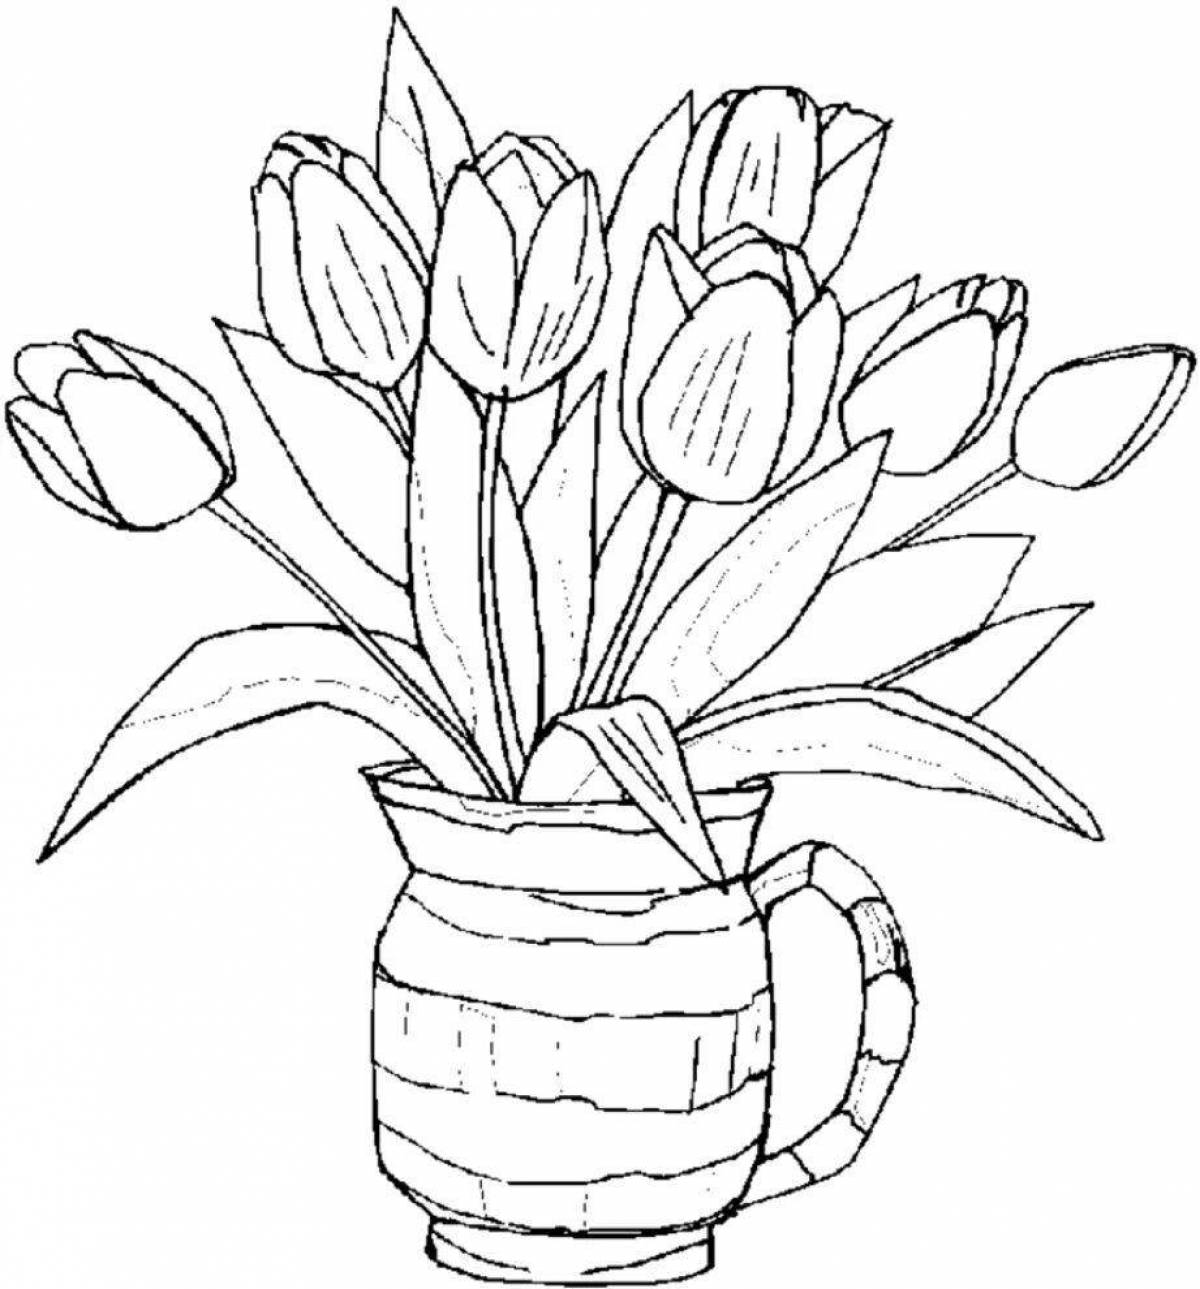 Glowing vase of flowers coloring book for children 5-6 years old